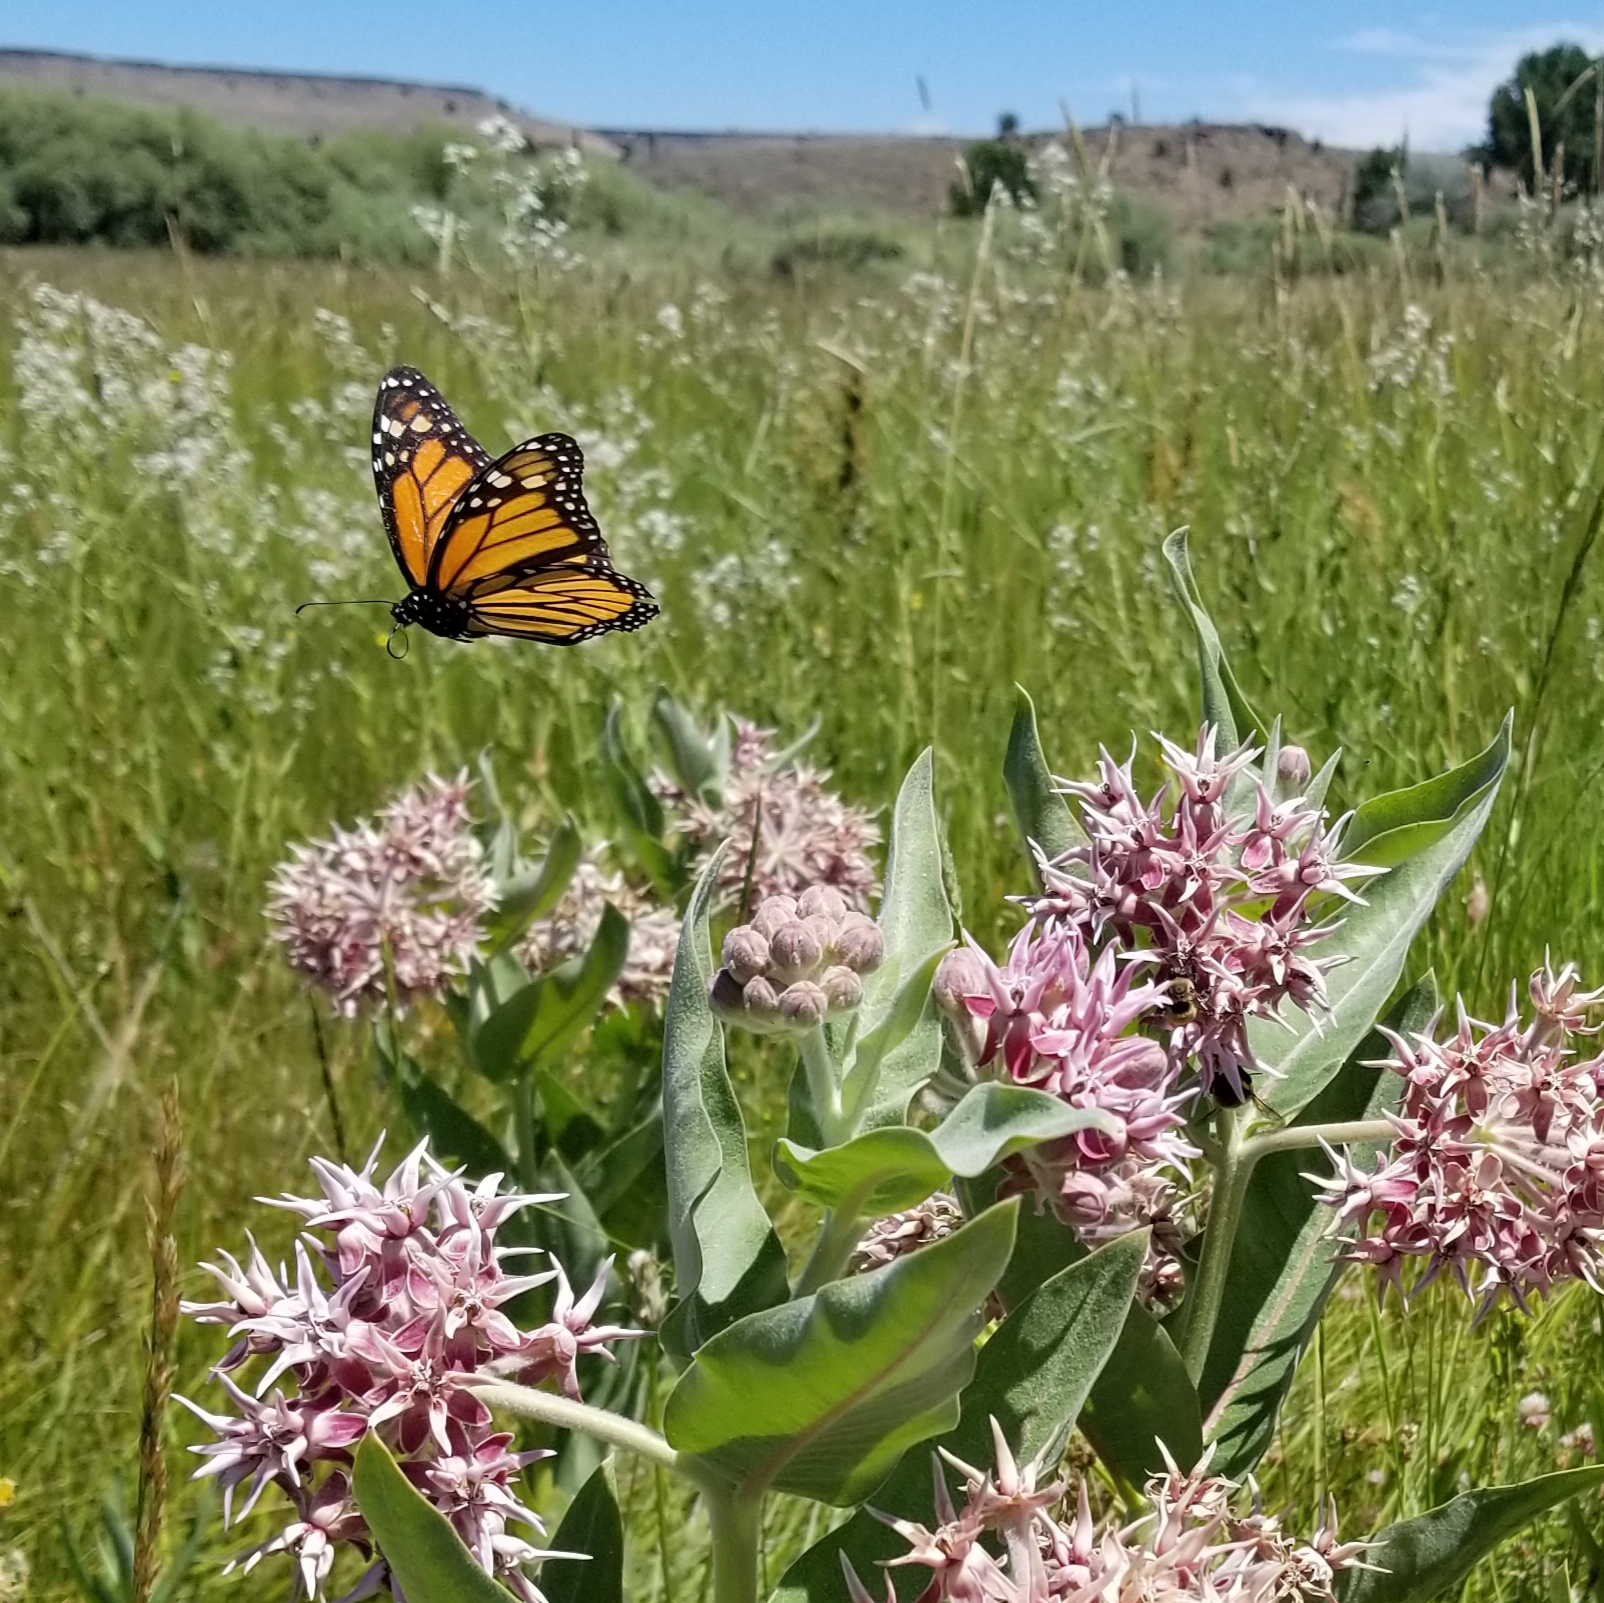 A bright orange monarch flutters over clusters of bright pink showy milkweed (Asclepias speciosa).